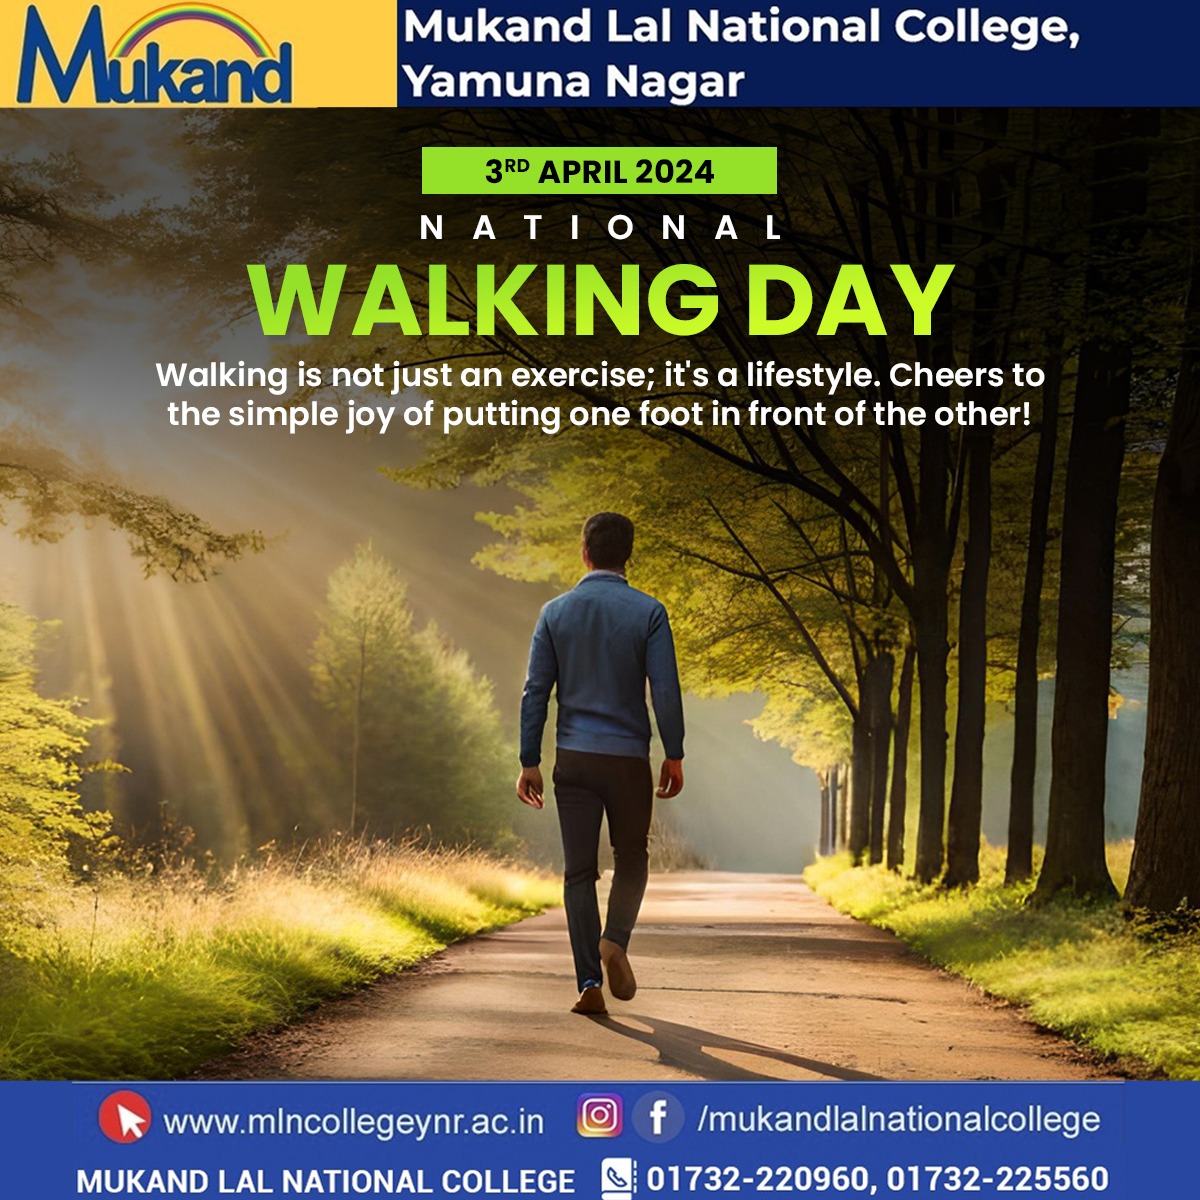 Happy National Walking Day!

Take strides towards better health and well-being.🚶‍♂️👟

.

.

.

#nationalwalkingday #walking #jogging #stayactive #healthylifestyle #steps #cardio #cardiovascularhealth #healthyweight #mentalhealth #digestion #mln #mlncollege